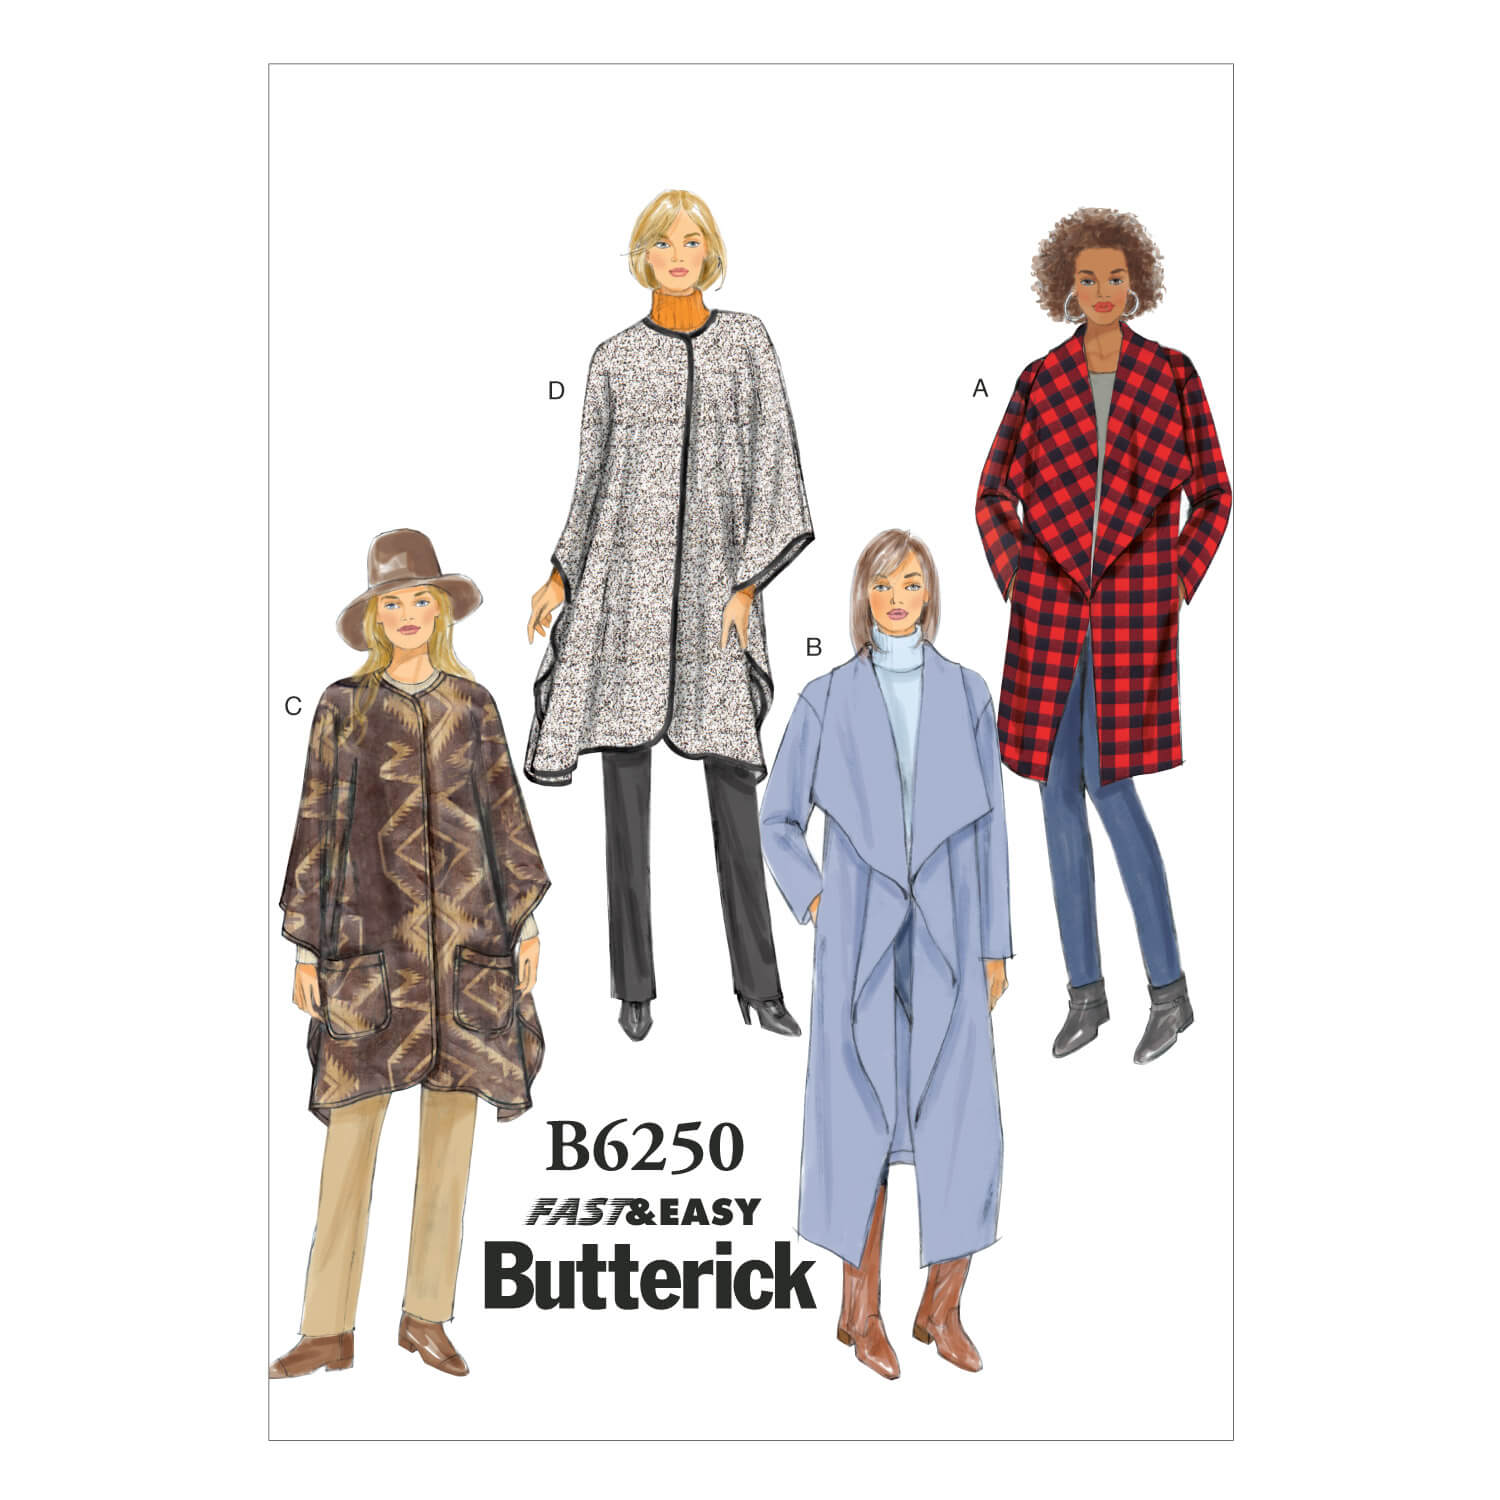 Butterick Sewing Pattern B6250 Misses' Jacket, Coat and Wrap